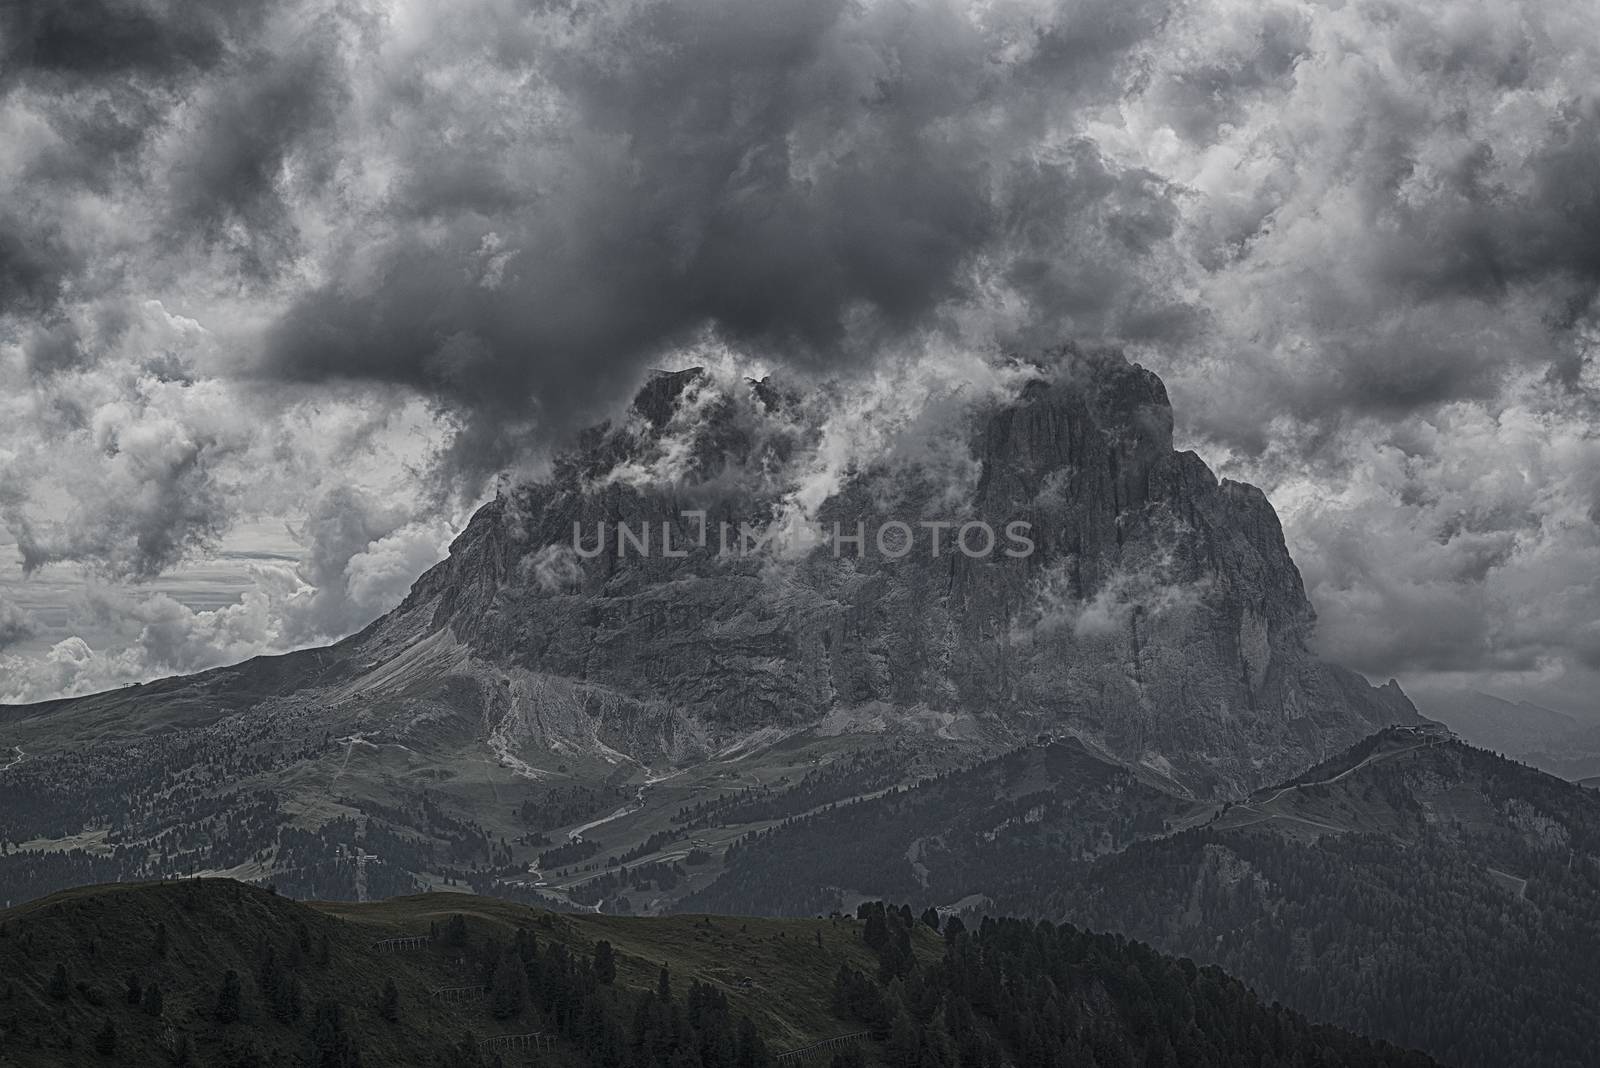 Langkofel in the clouds by Mdc1970